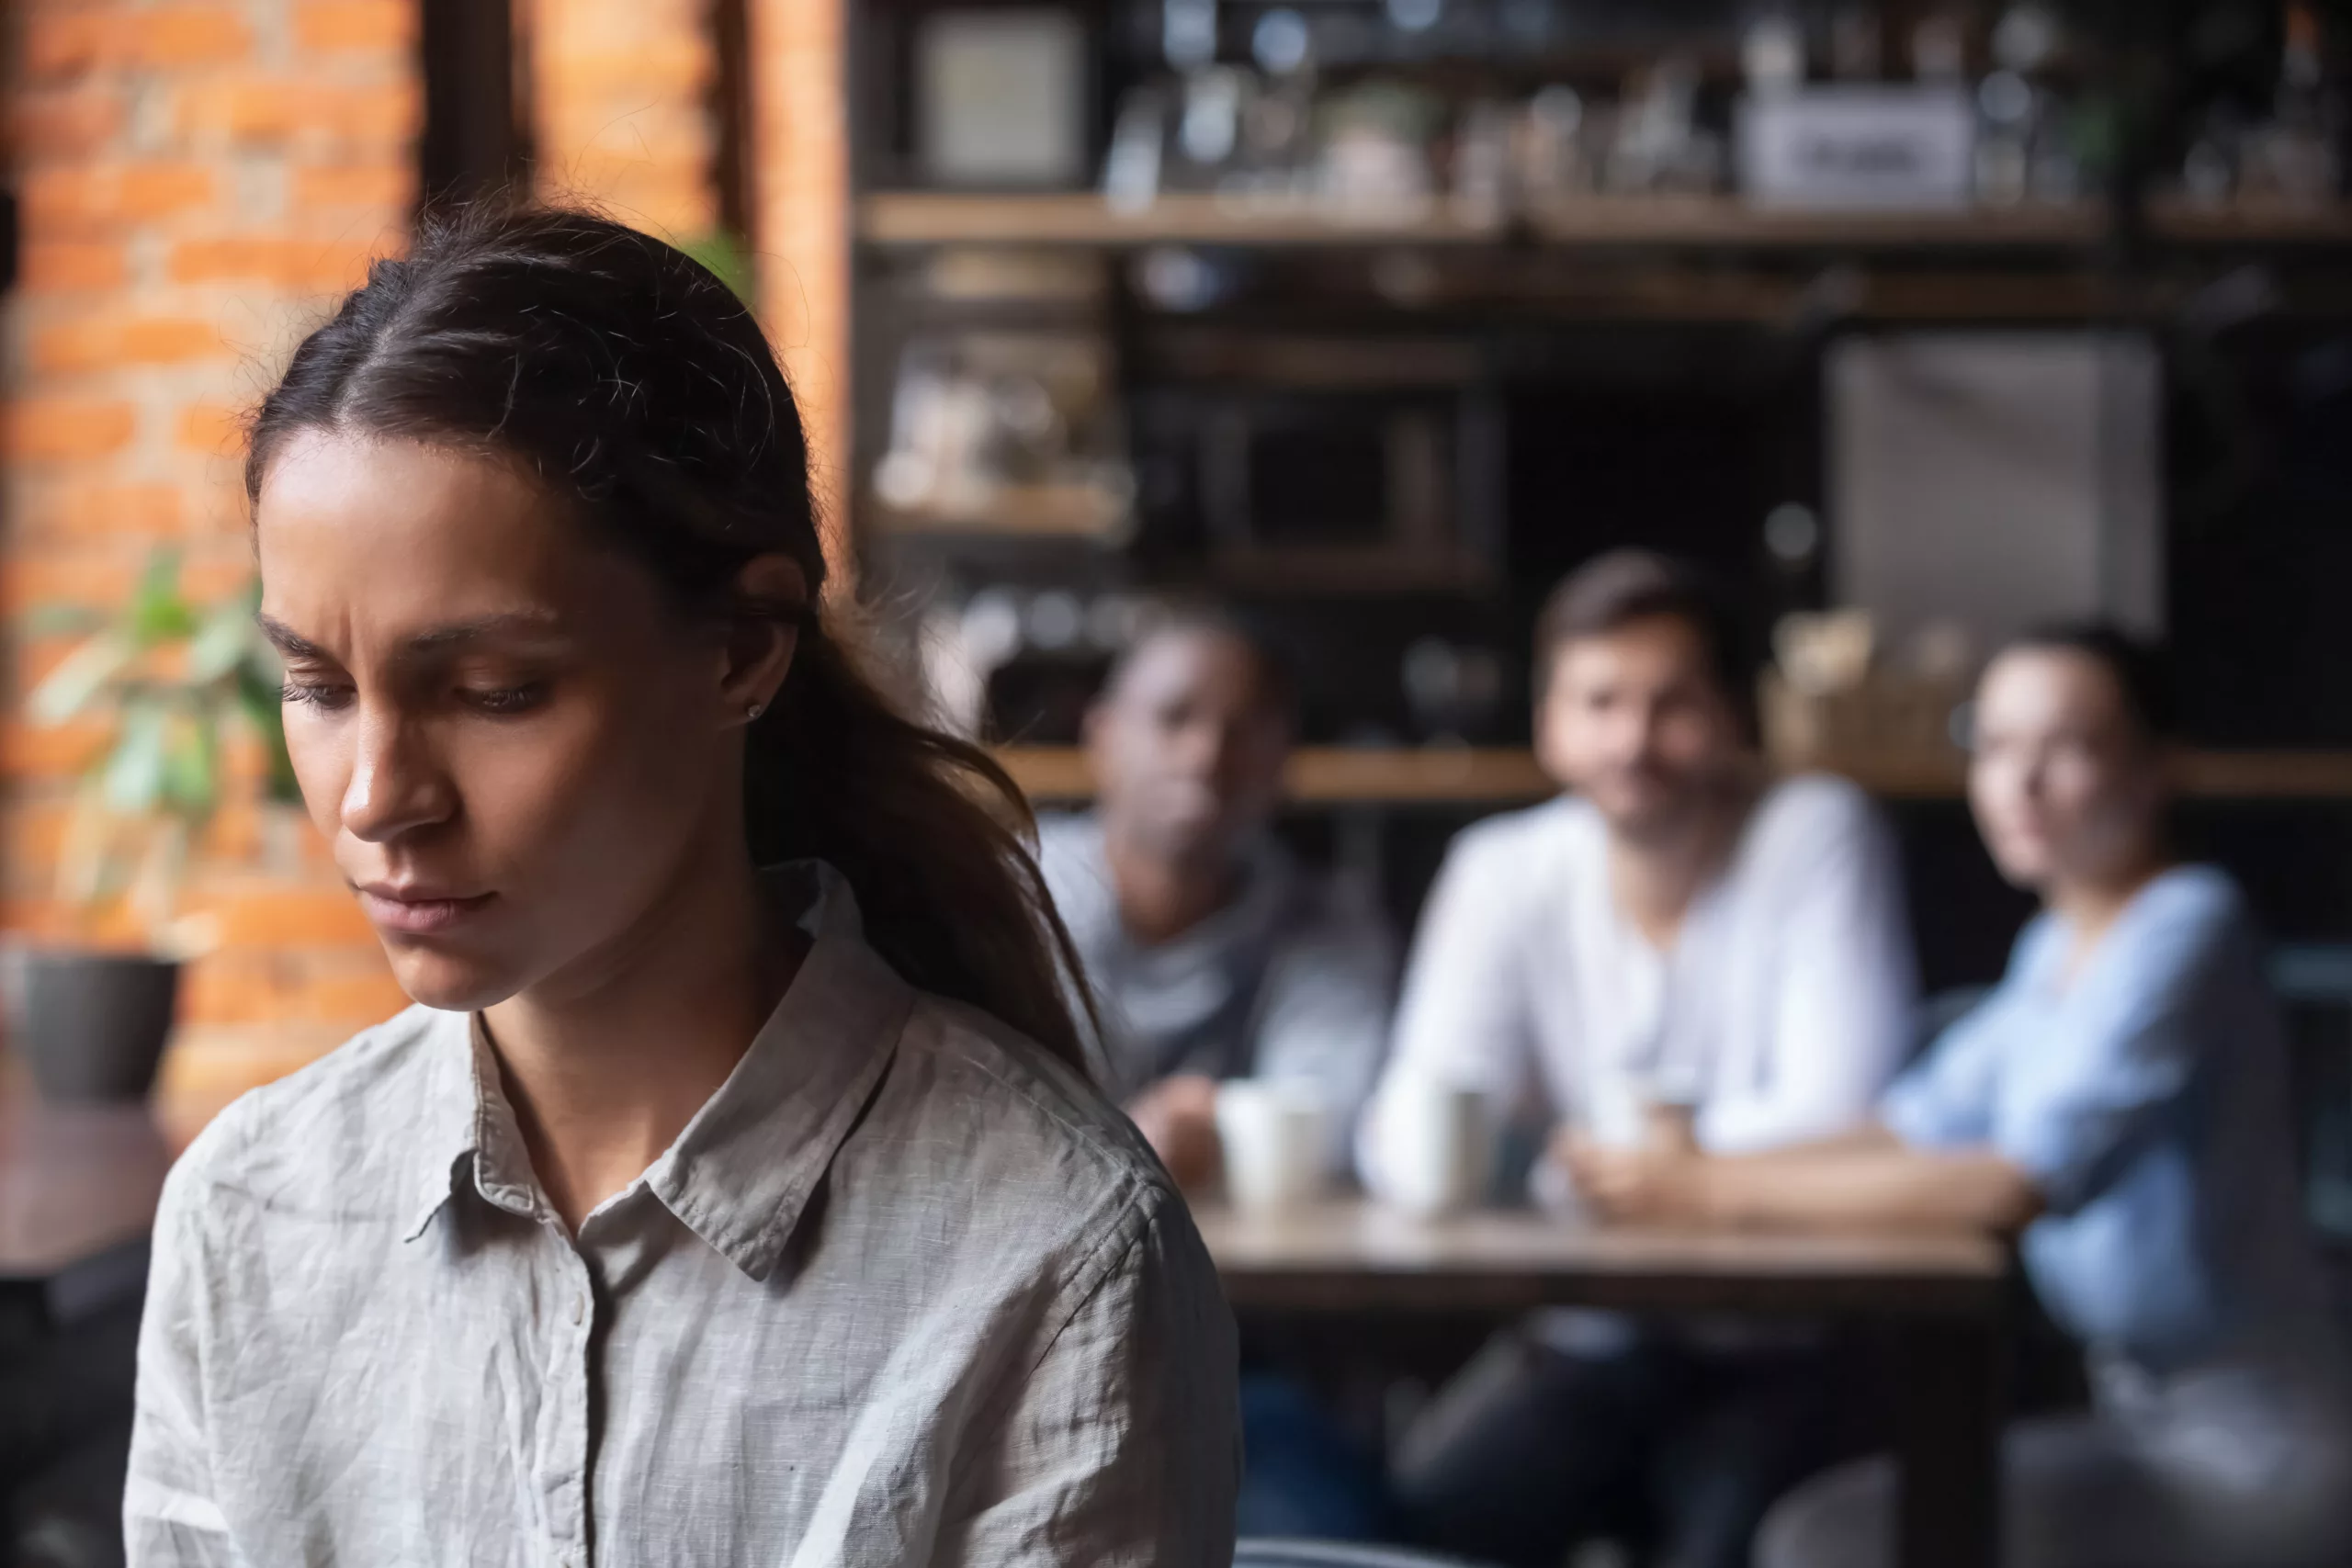 Upset mixed race woman suffering from bullying, discrimination, excluded girl having problem with bad friends, feeling offended and hurt, sitting alone in cafe, avoiding people, social outcast